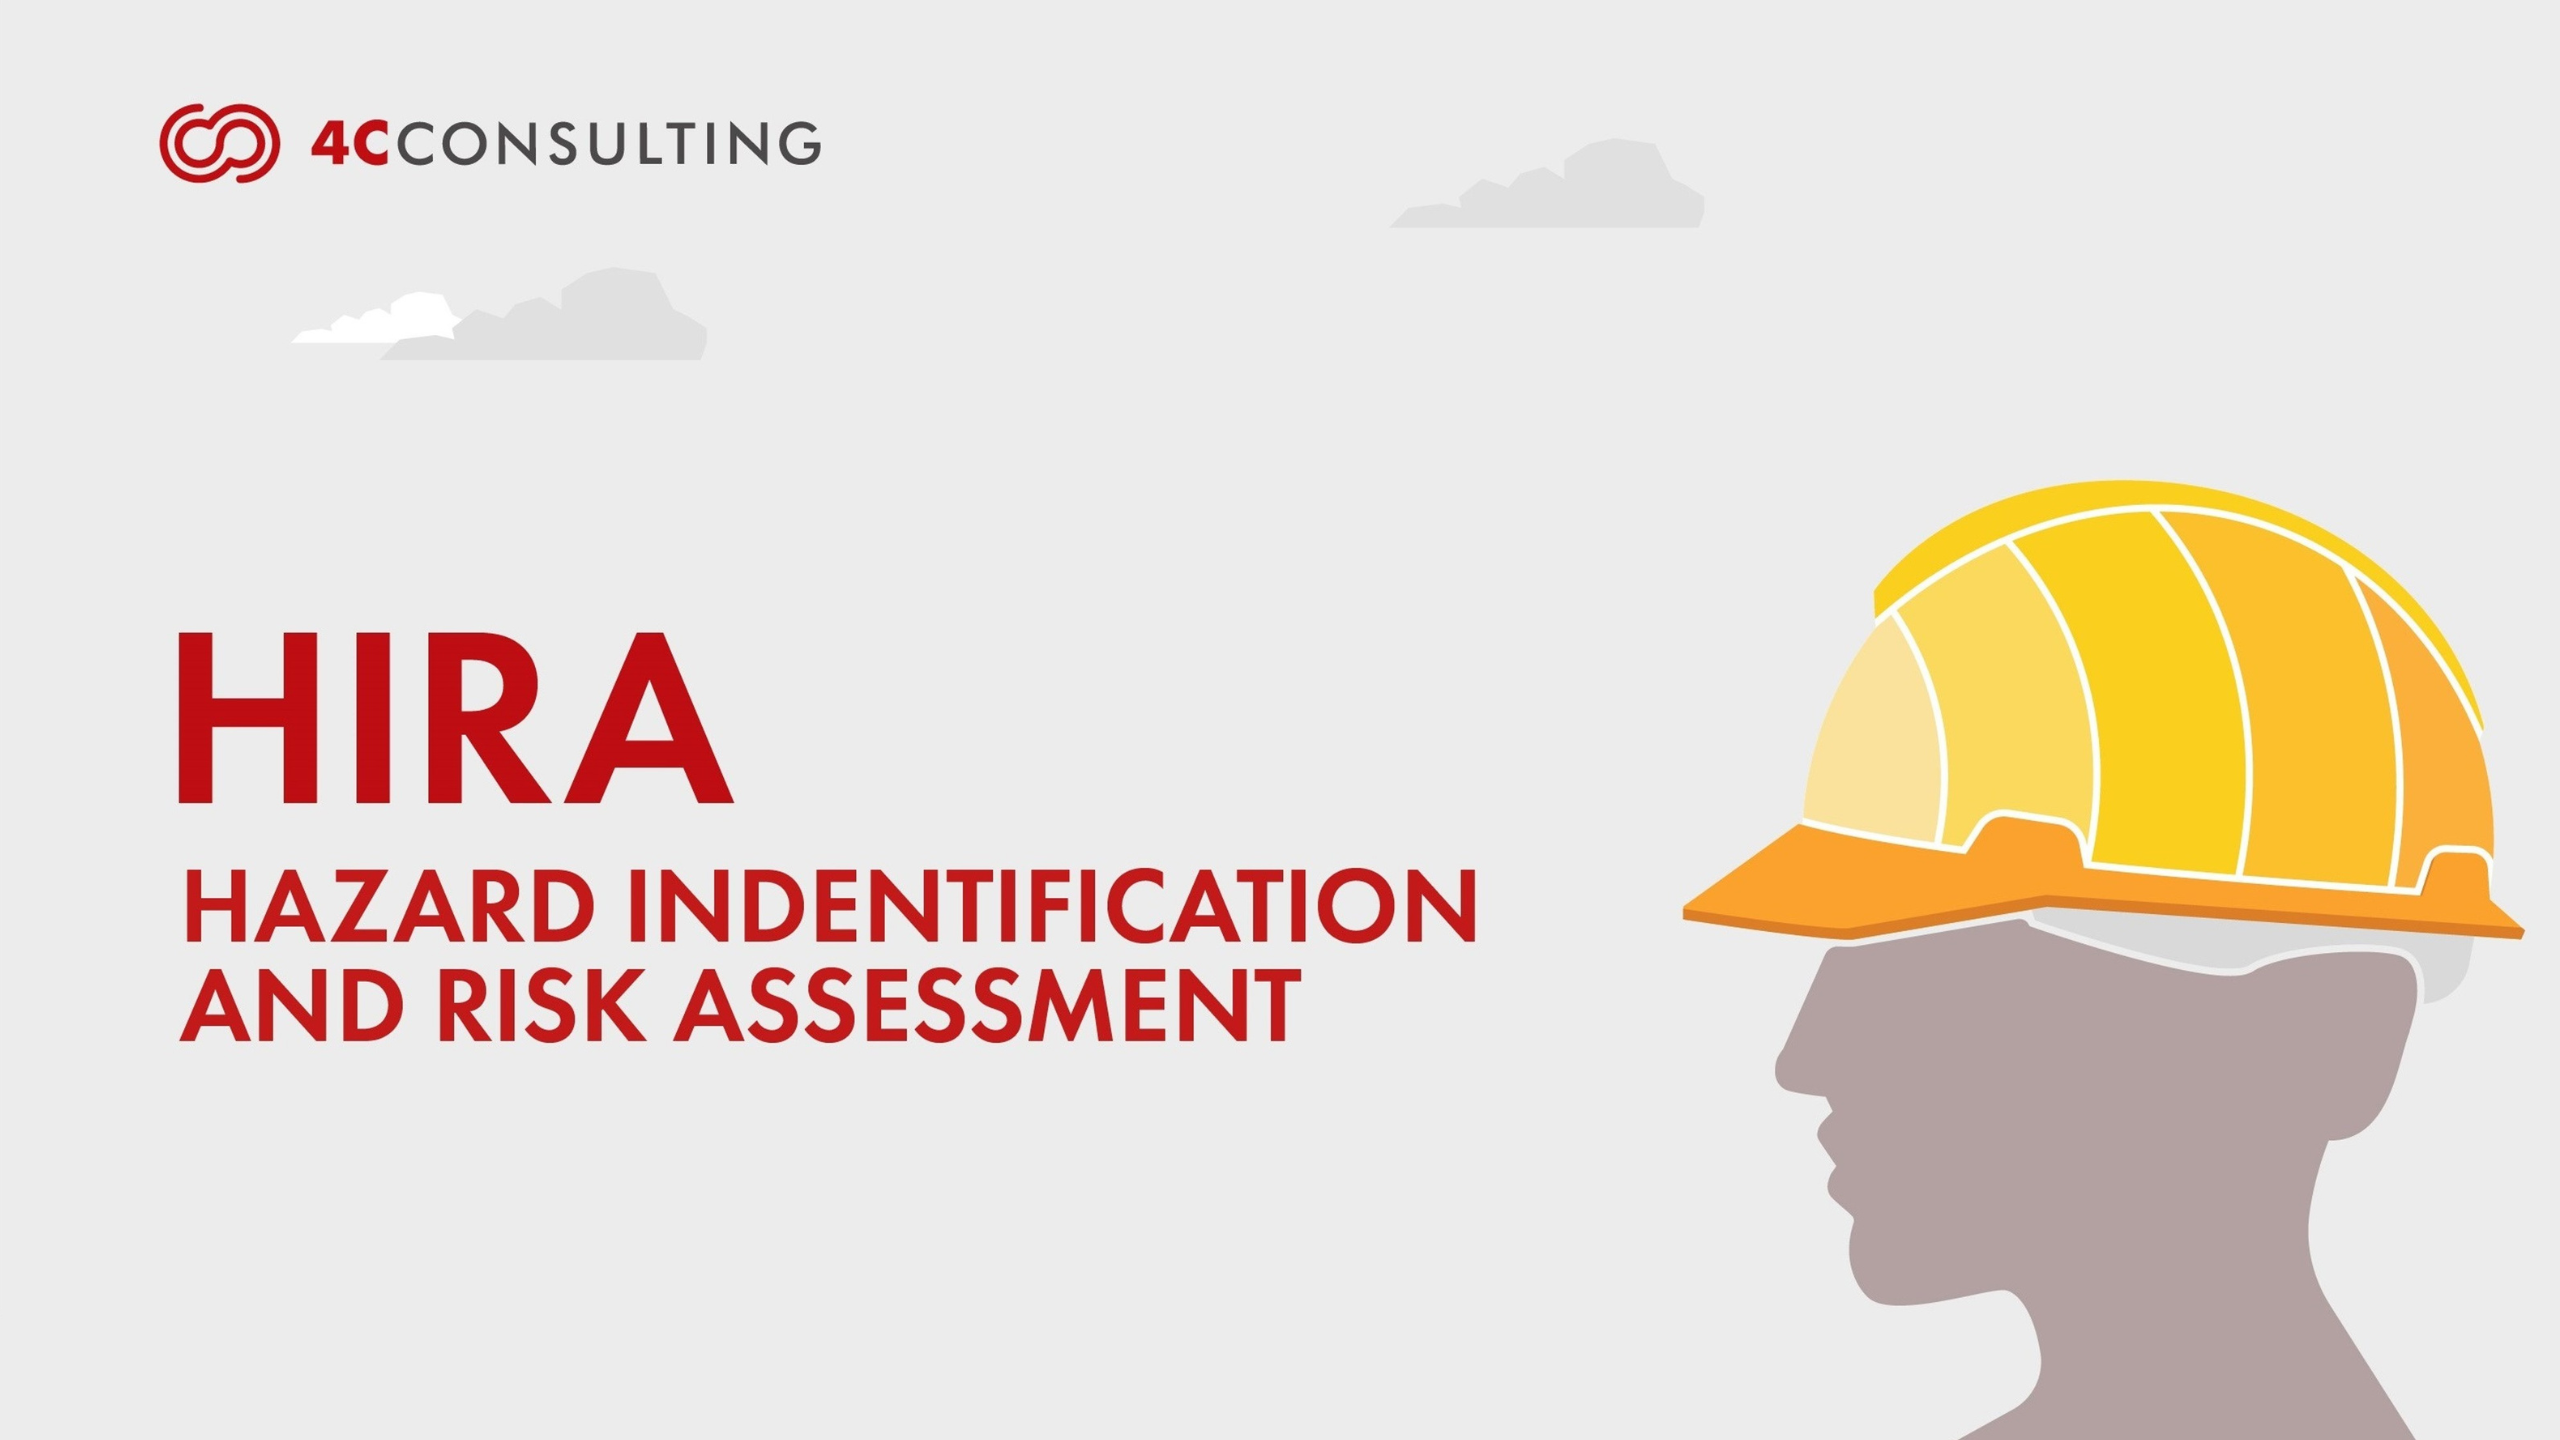 HIRA: A Guide to Hazard Identification and Risk Assessment for Workplace Safety